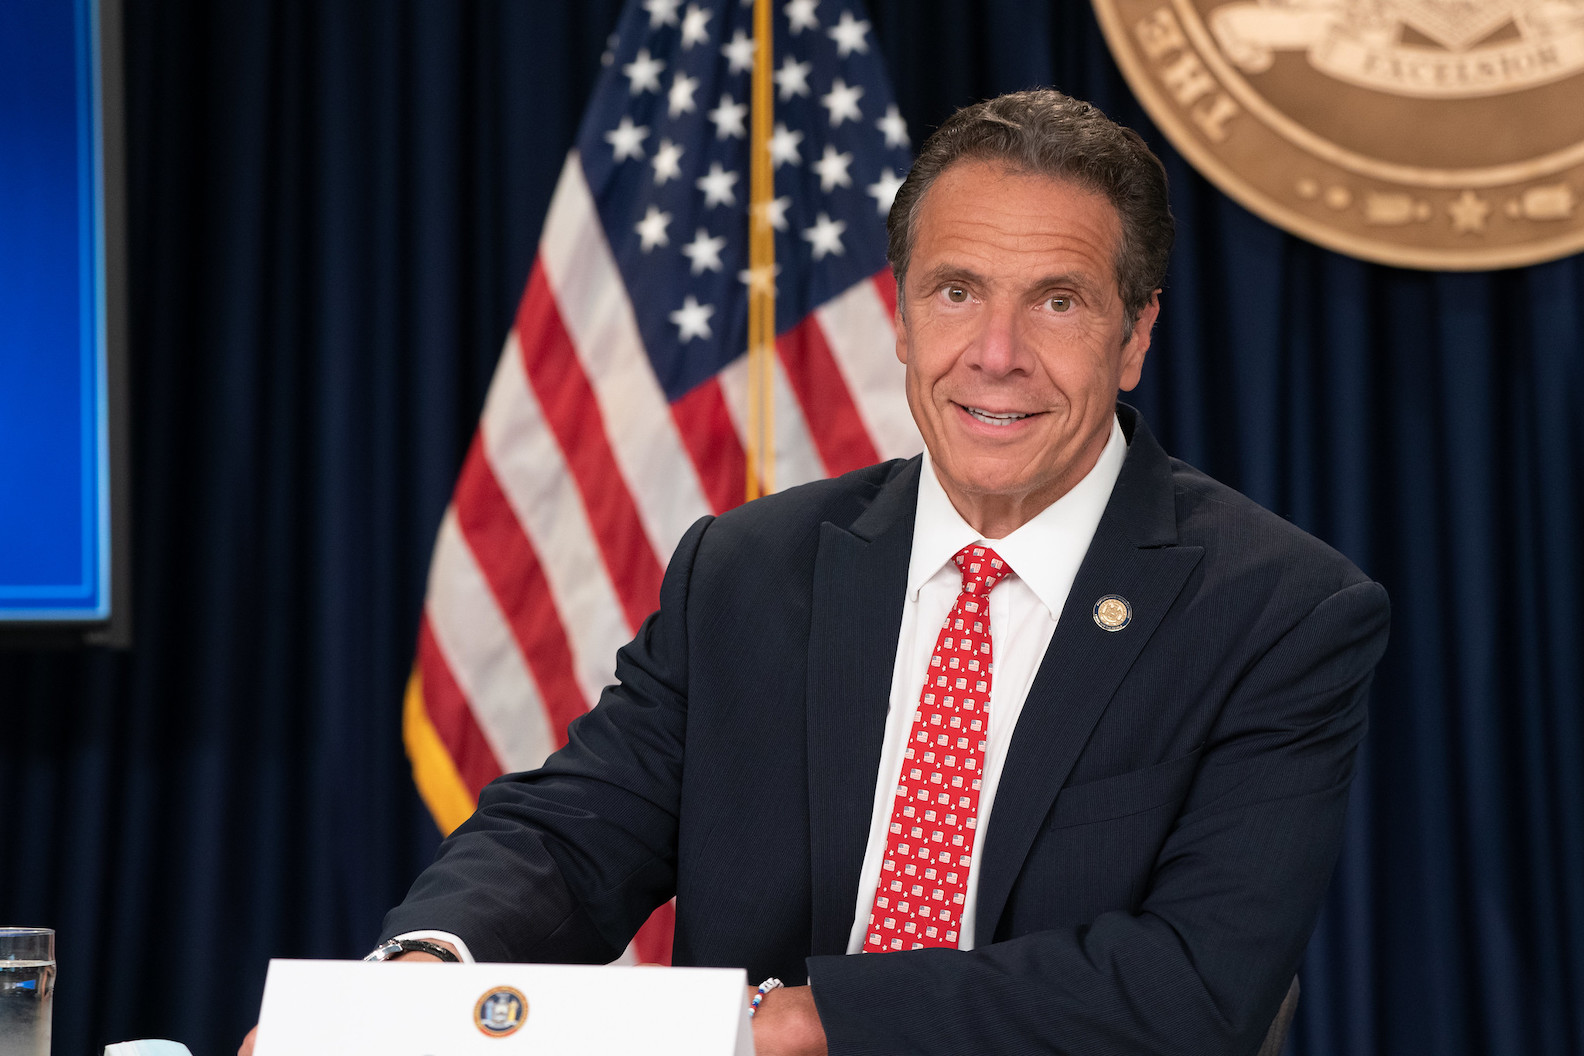 Gov. Andrew Cuomo is shown addressing the media in this file photo from July 18, 2020. (Image courtesy of the Office of Gov. Andrew M. Cuomo)